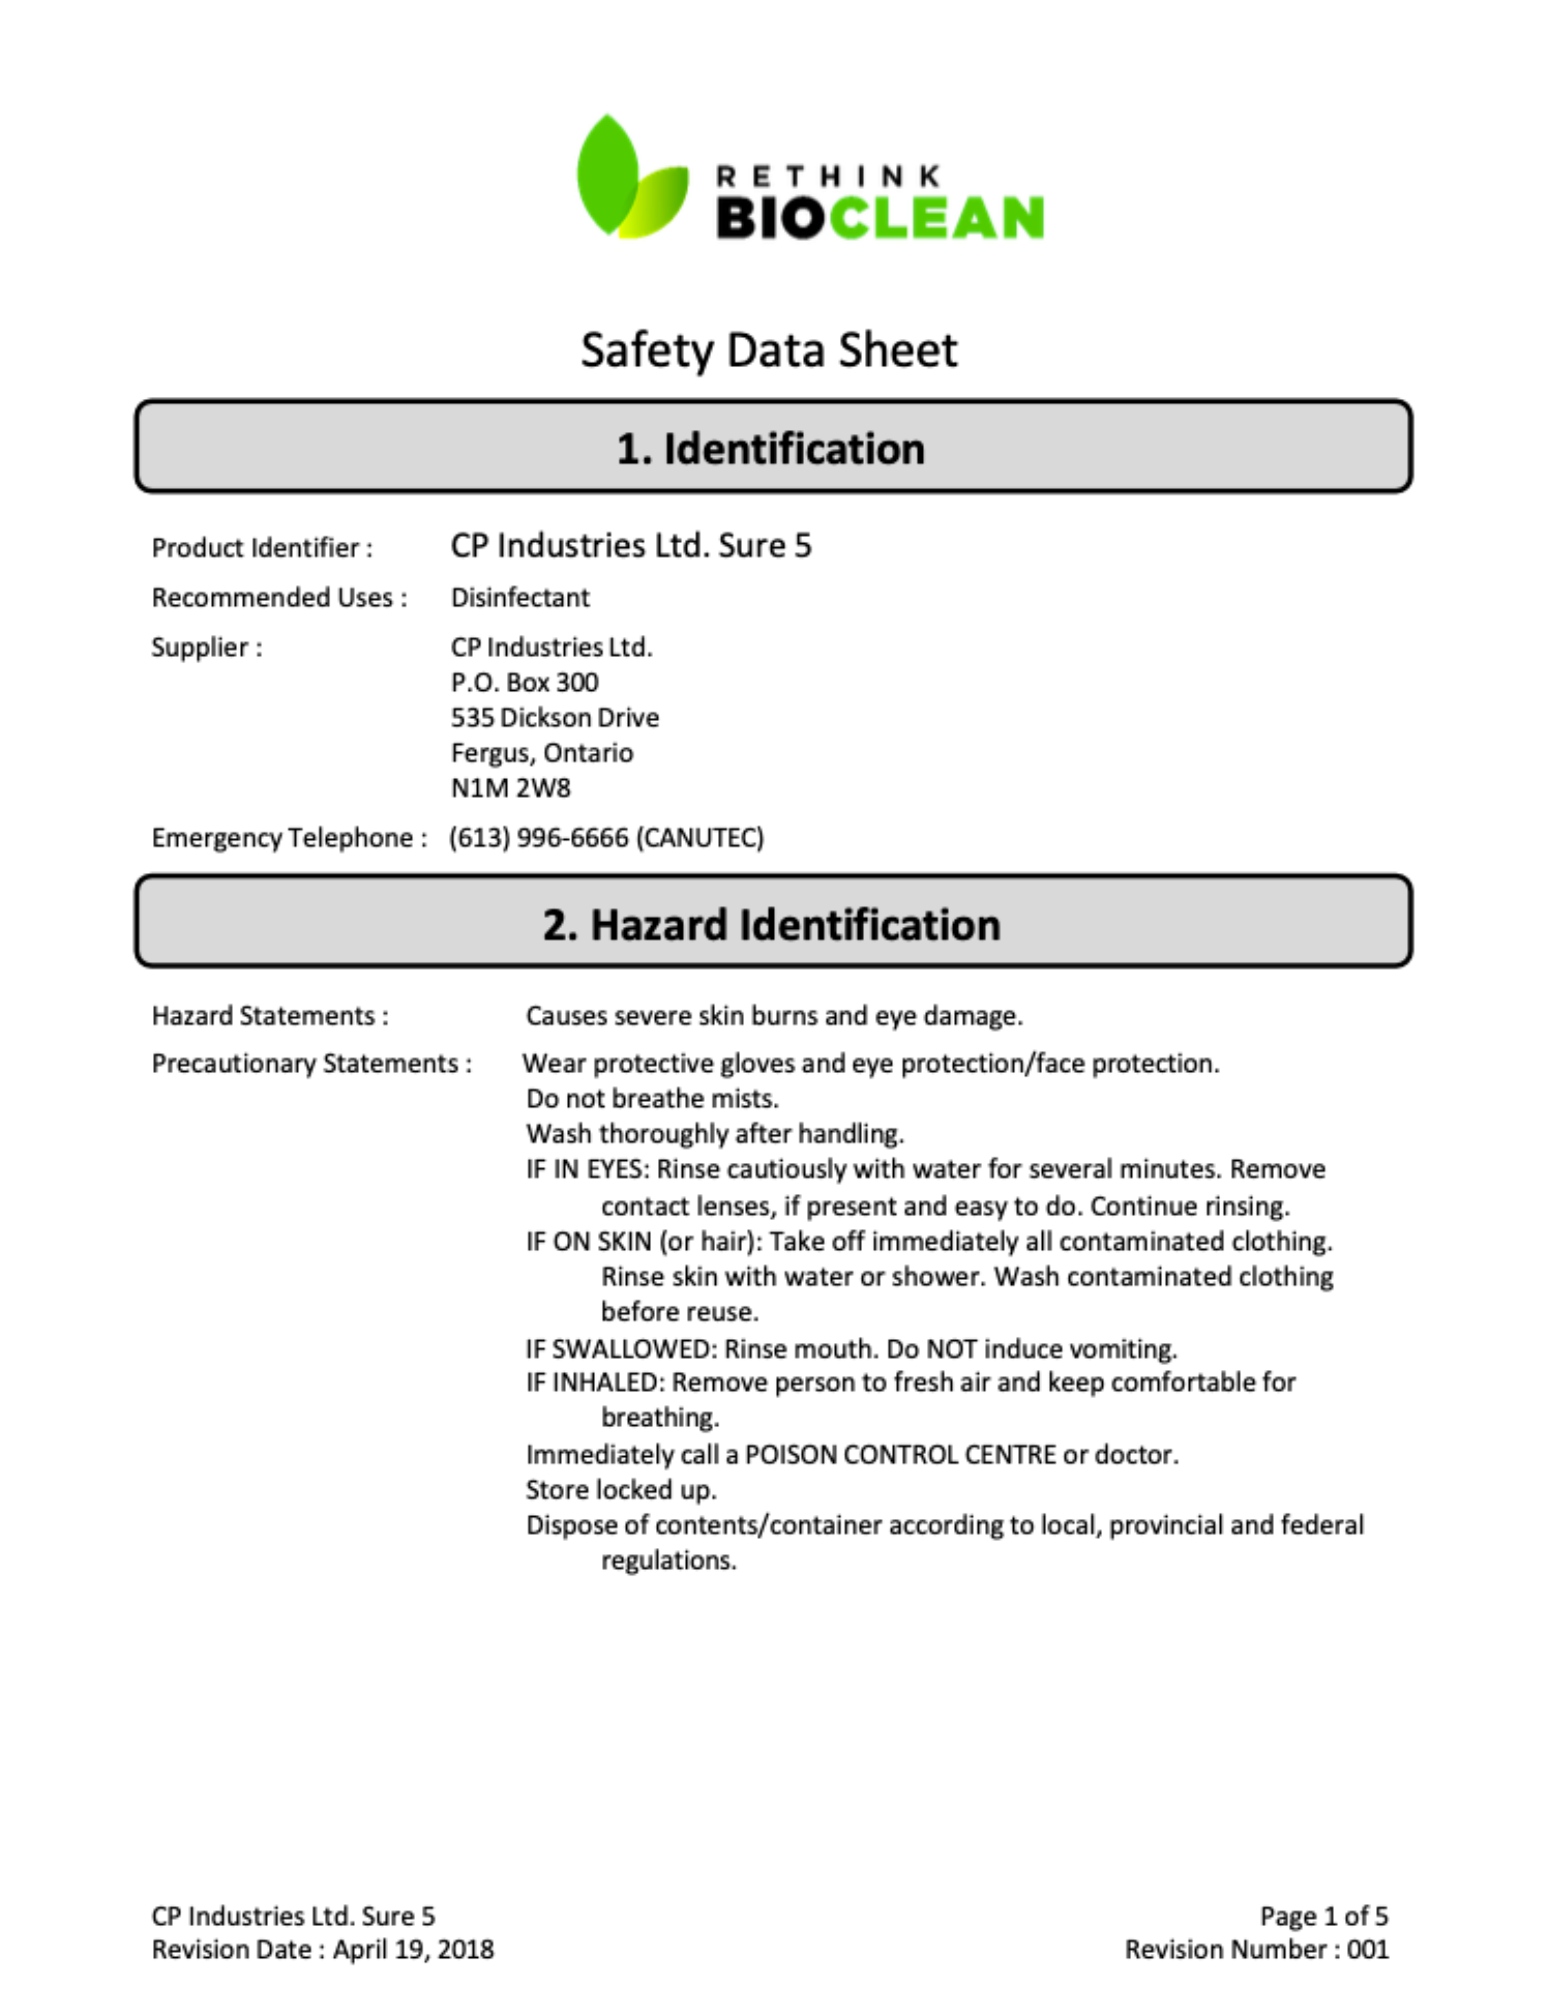 Safety Data Sheet of ReThink BioClean's Sure 5.